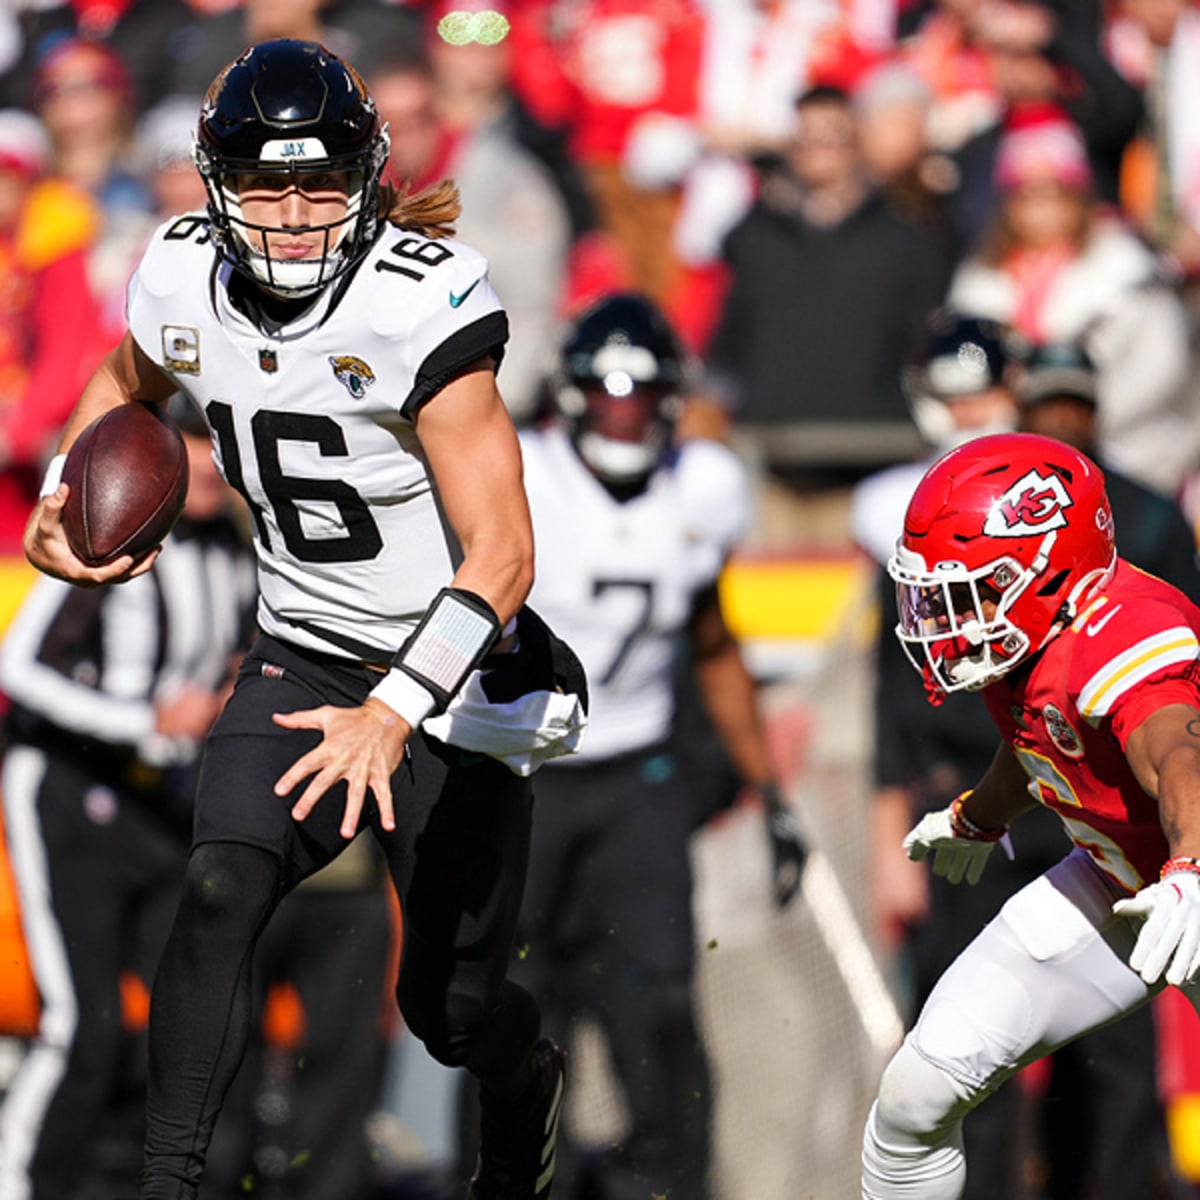 Jaguars vs. Chiefs AFC playoff preview: Keys to NFL divisional game